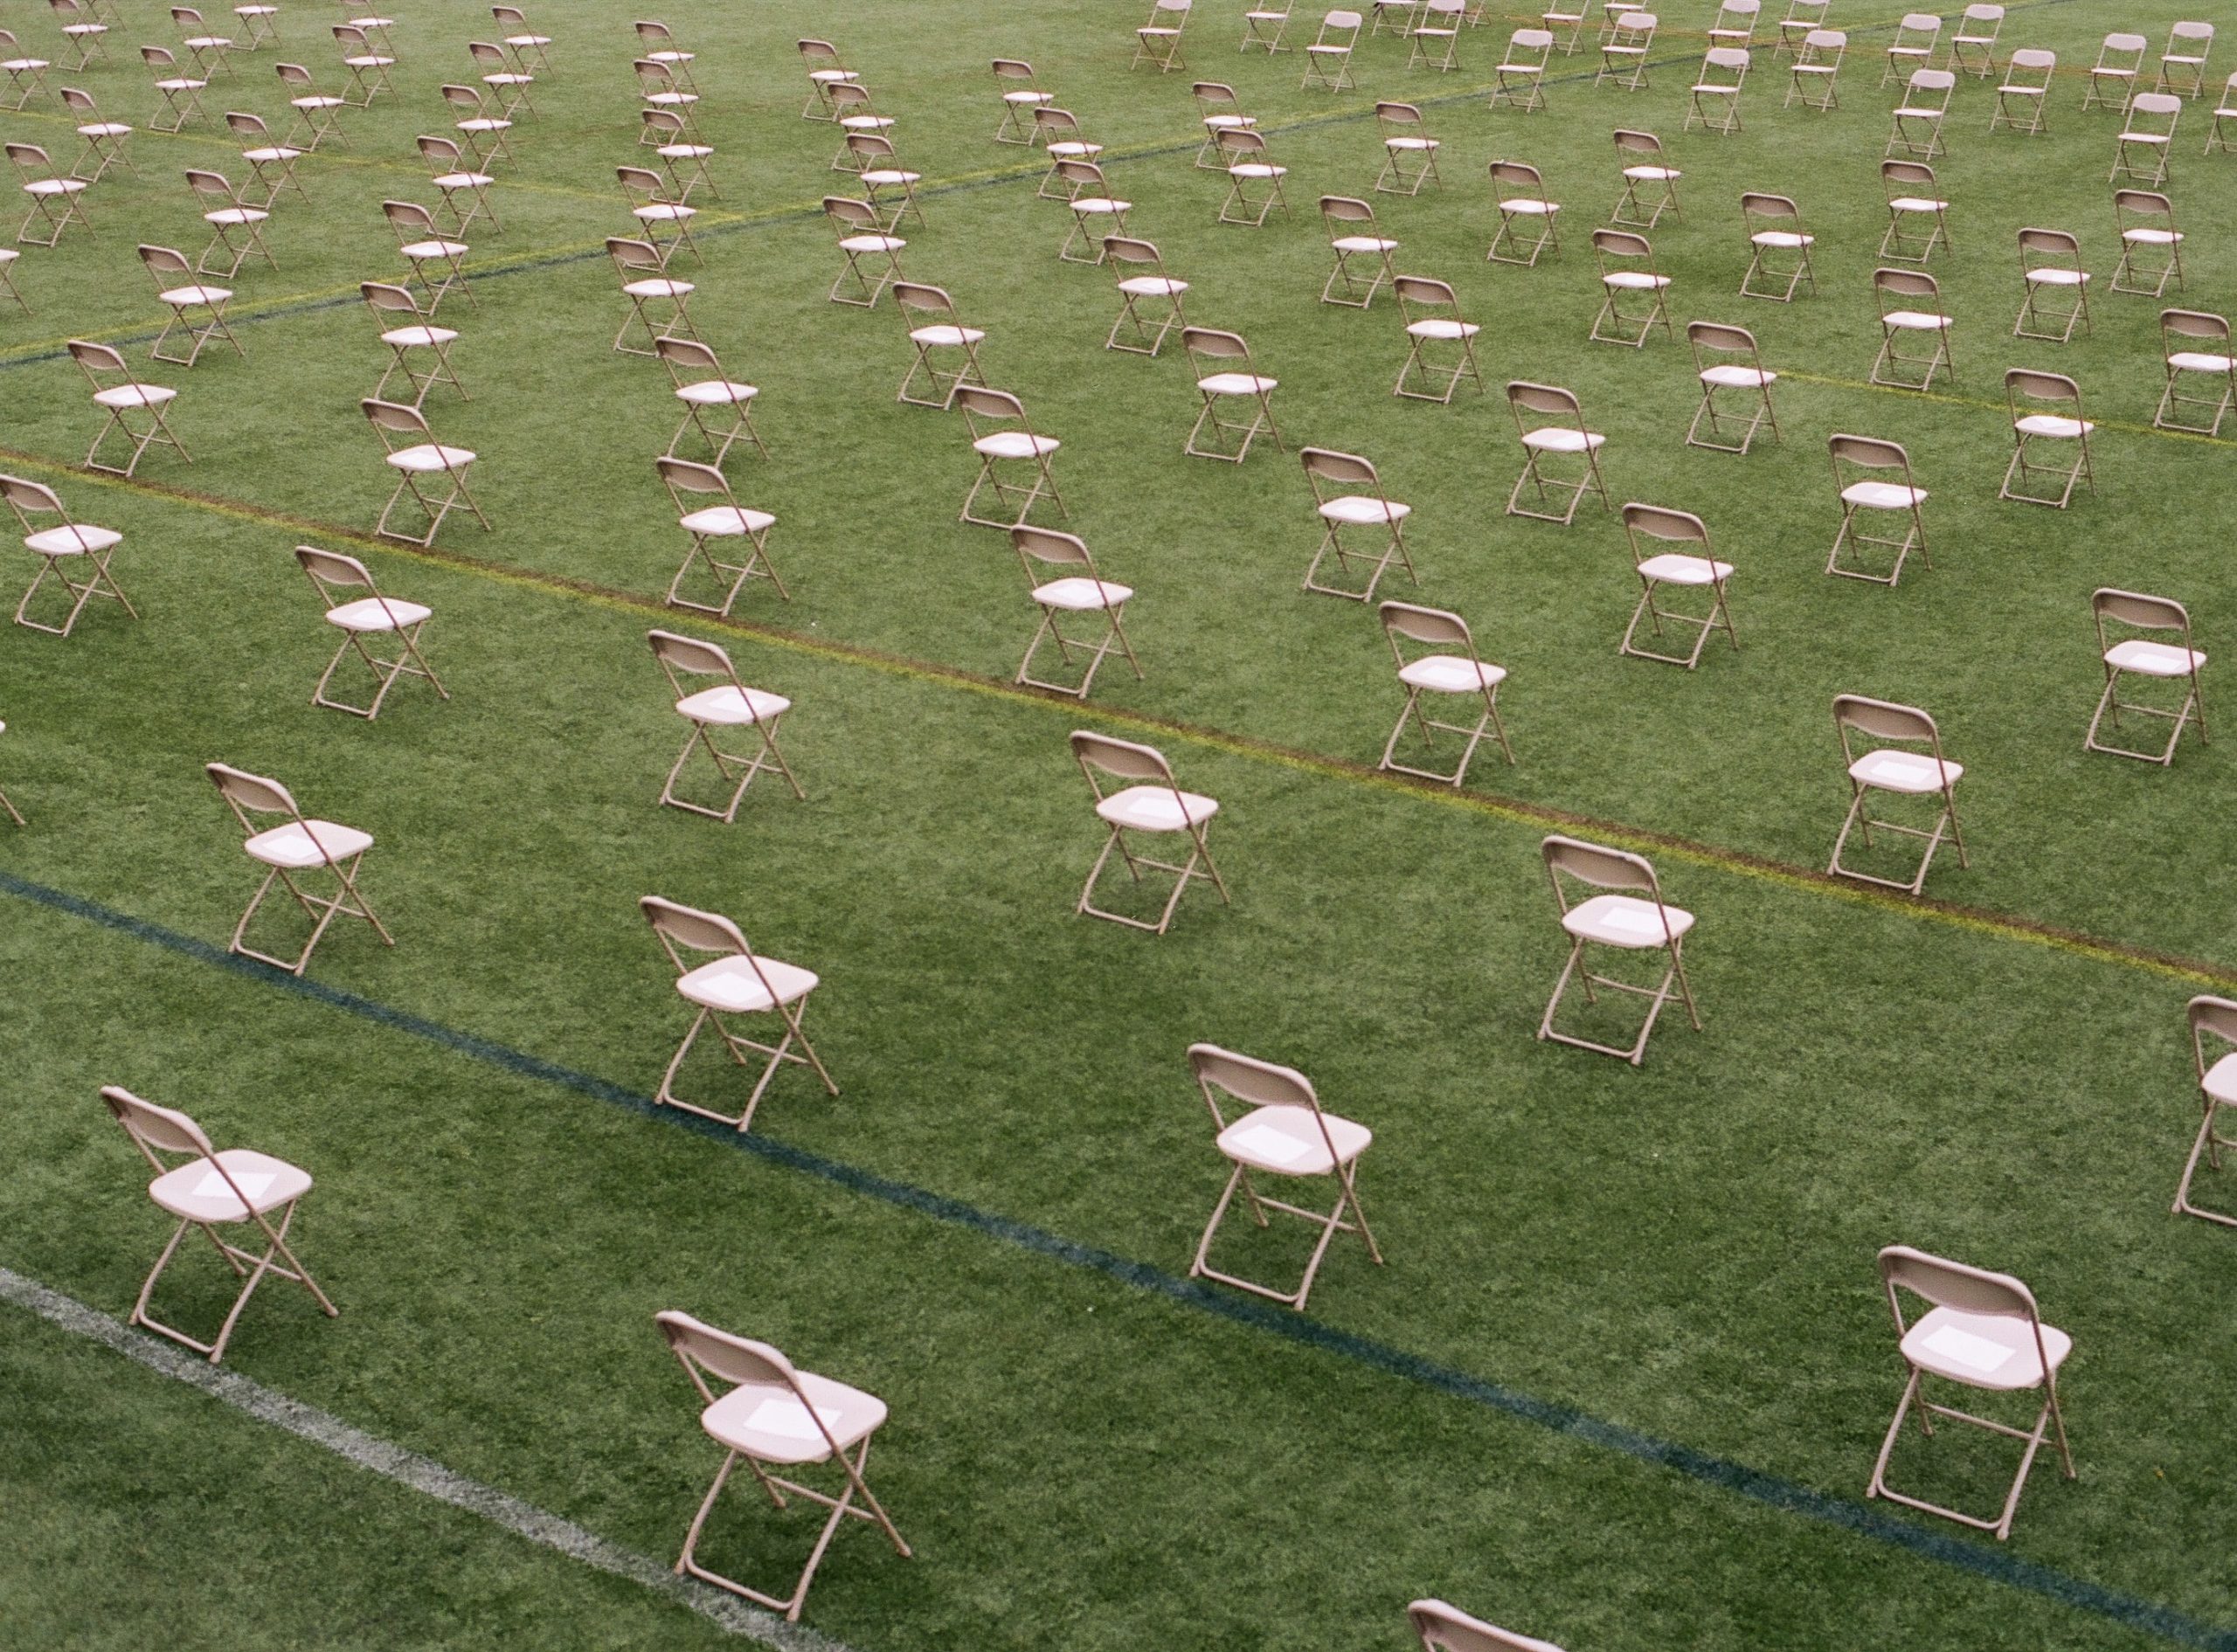 A photo looking down at several rows of pink picnic chairs placed six feet apart and facing away from the camera. The chairs are in an outdoor sports field with white, blue, yellow, and red lines painted on the grass.